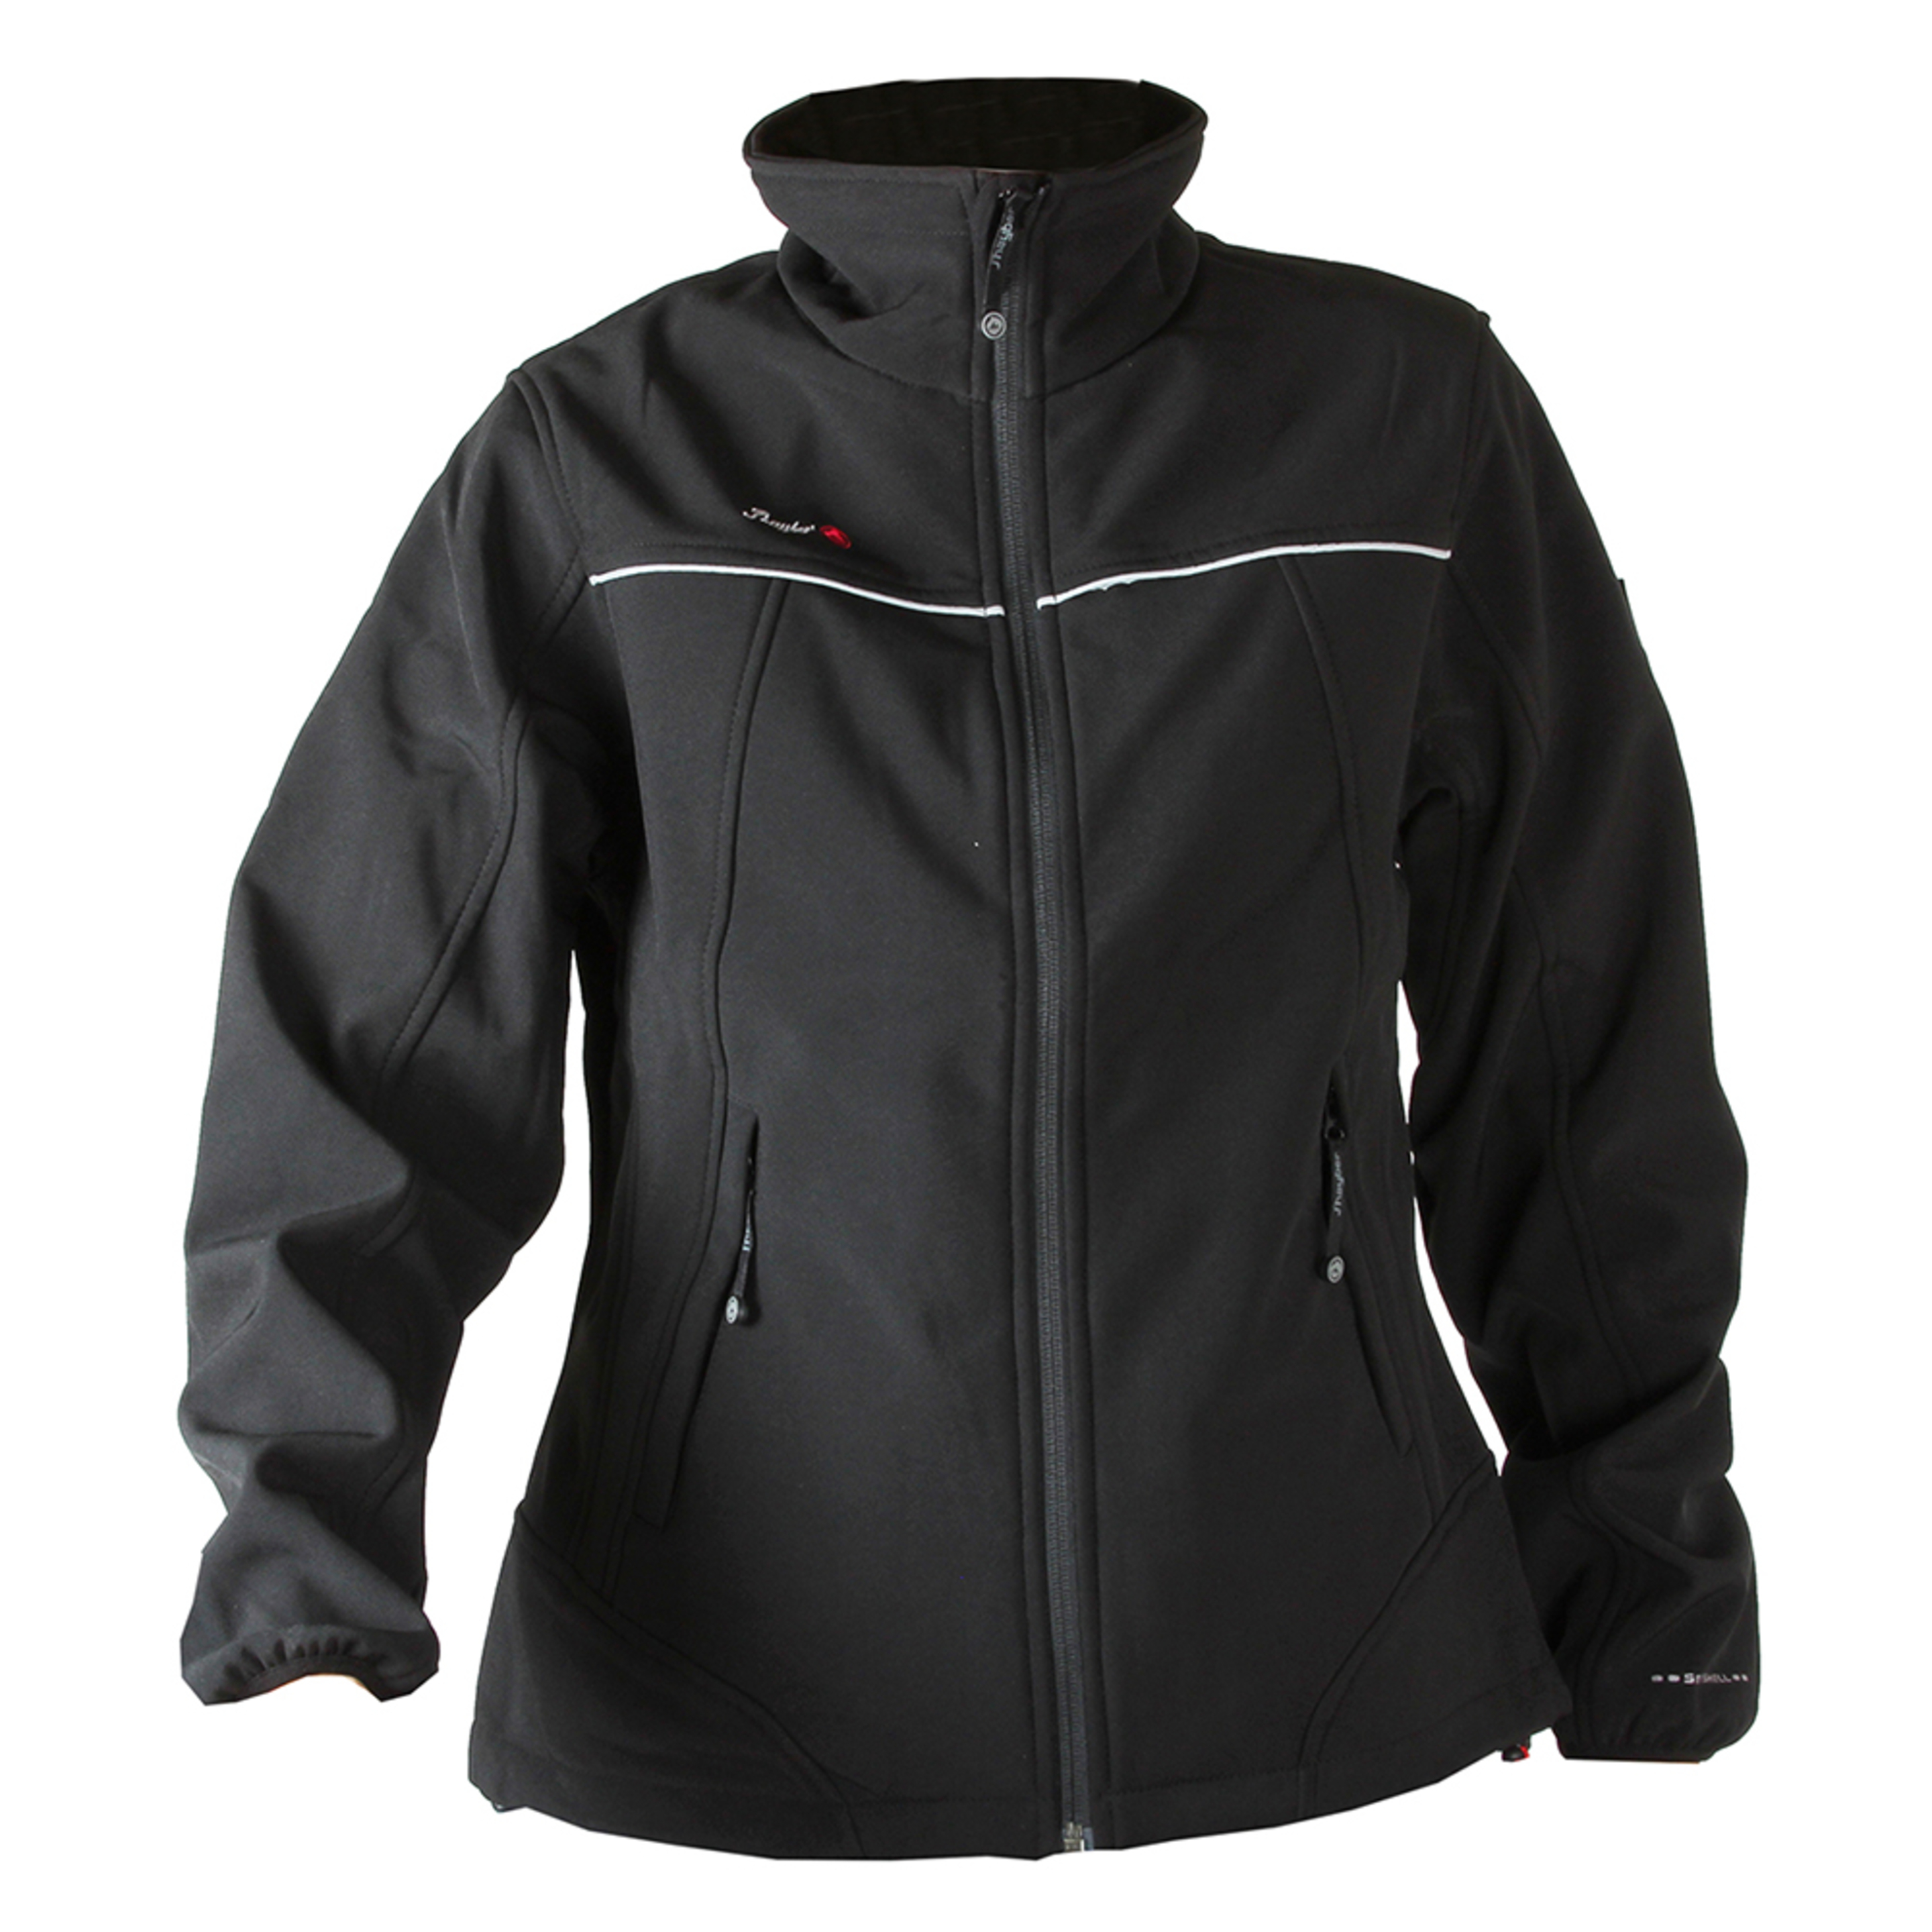 Chaqueta Softshell Ds5502 Mujer Outlet J'Hayber - negro - 